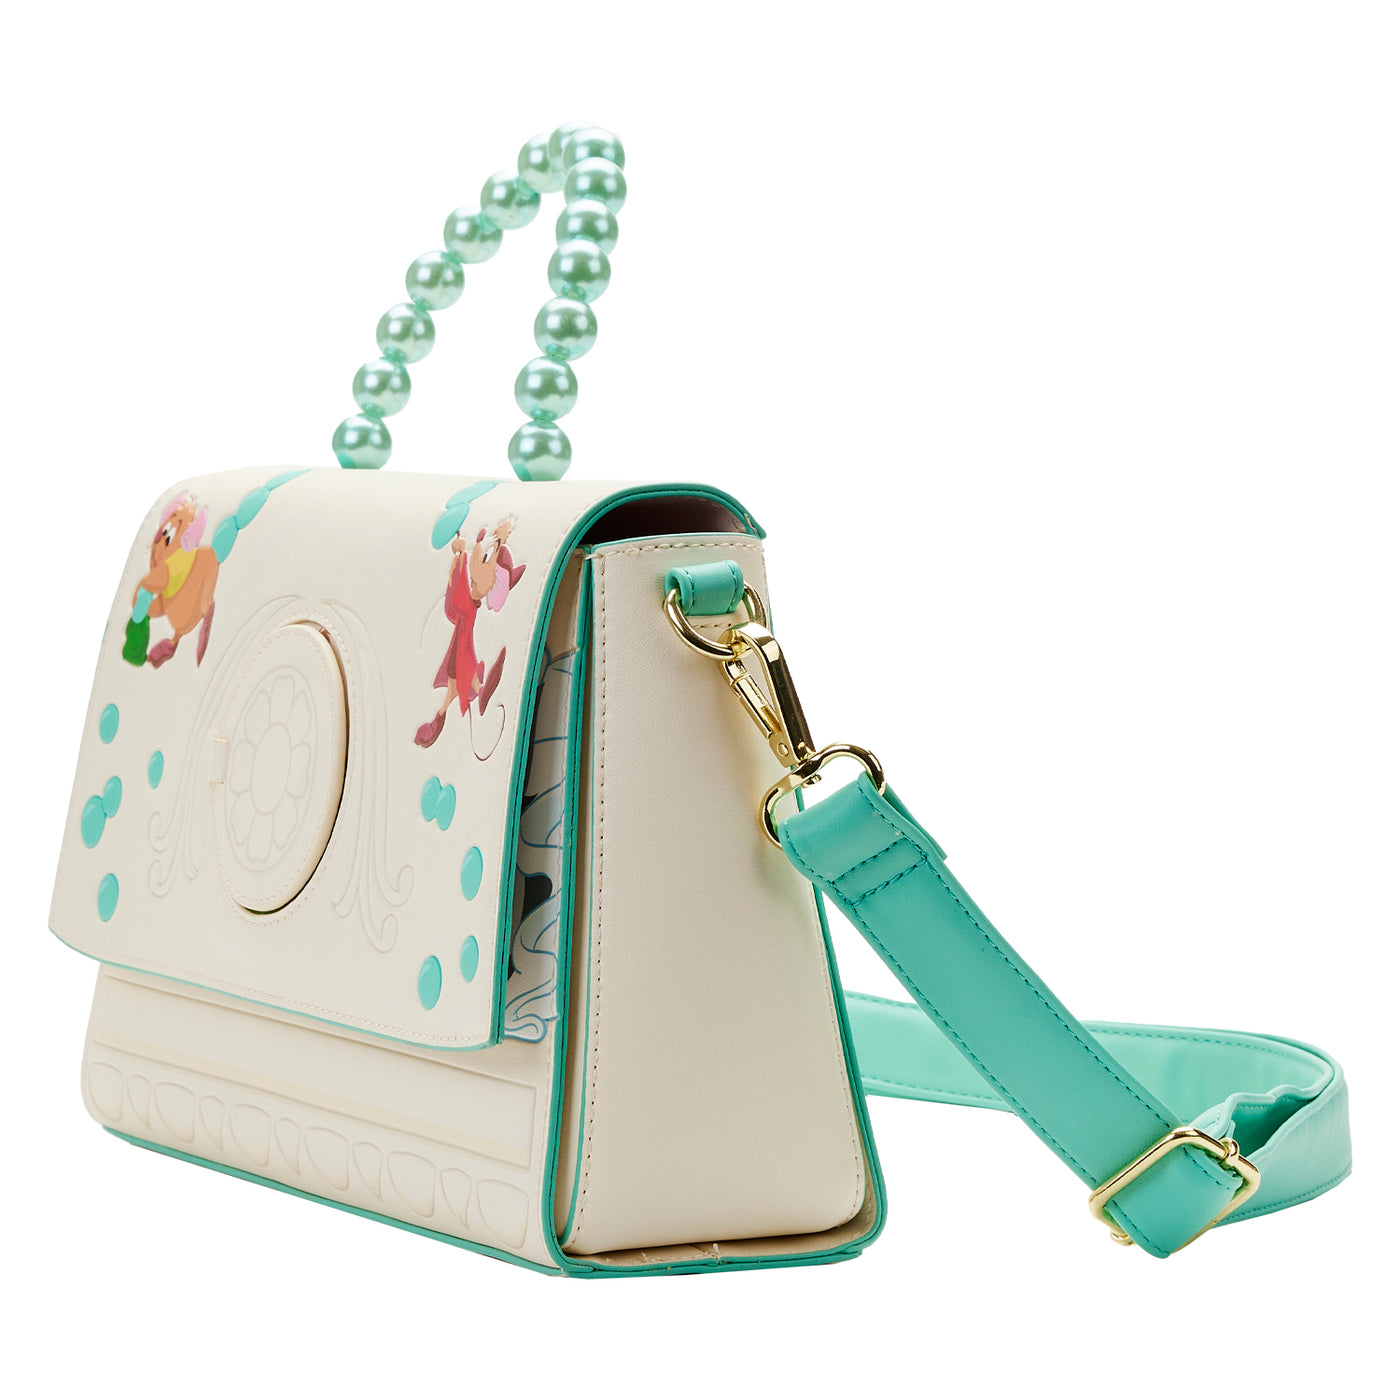 Buy Cinderella Happily Ever After Crossbody Bag at Loungefly.